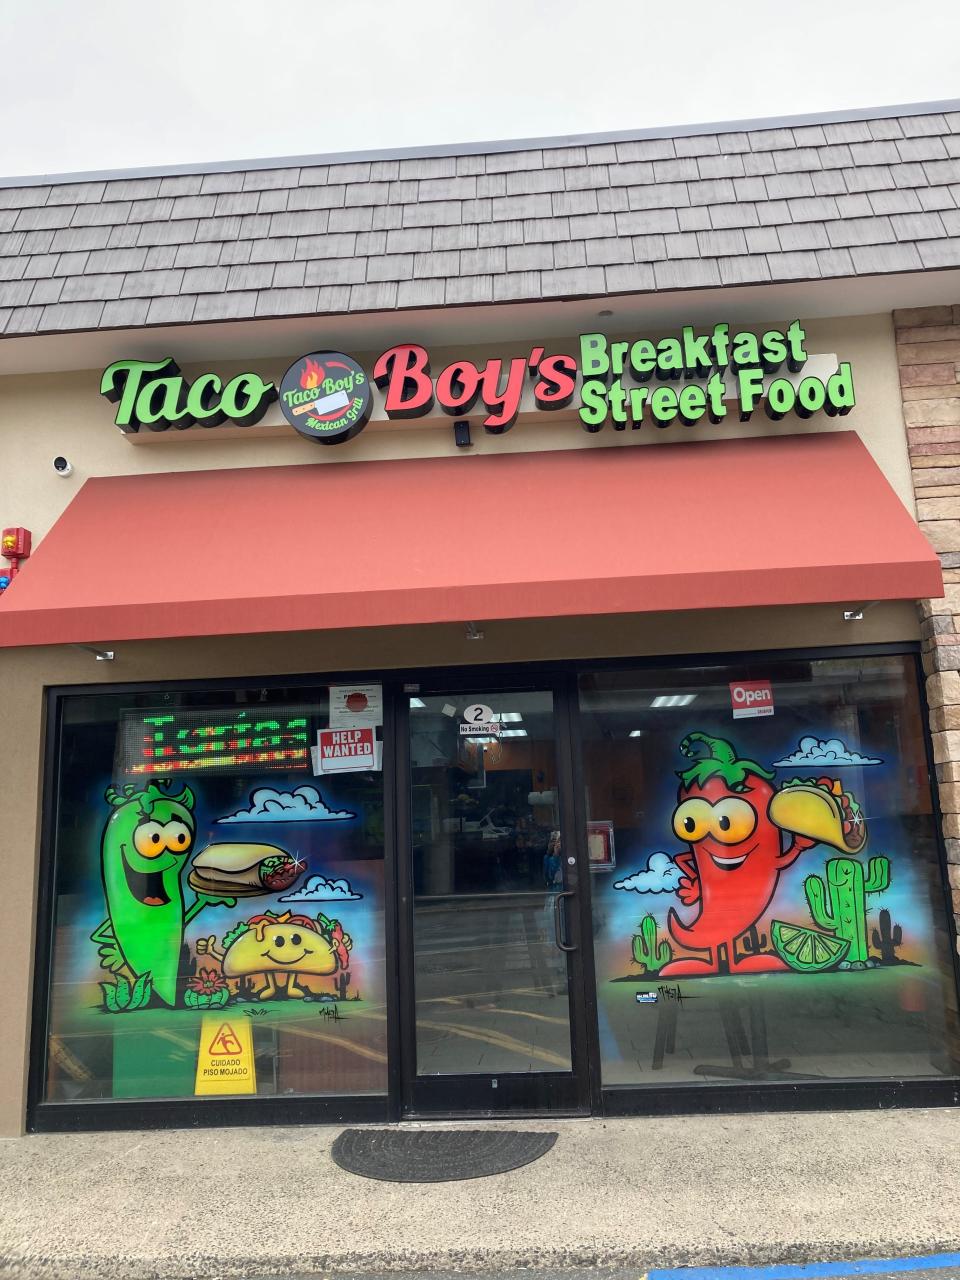 Taco Boys opened in Nyack in April and serves a variety of tacos and other authentic Mexican food. Photographed May 11, 2022.